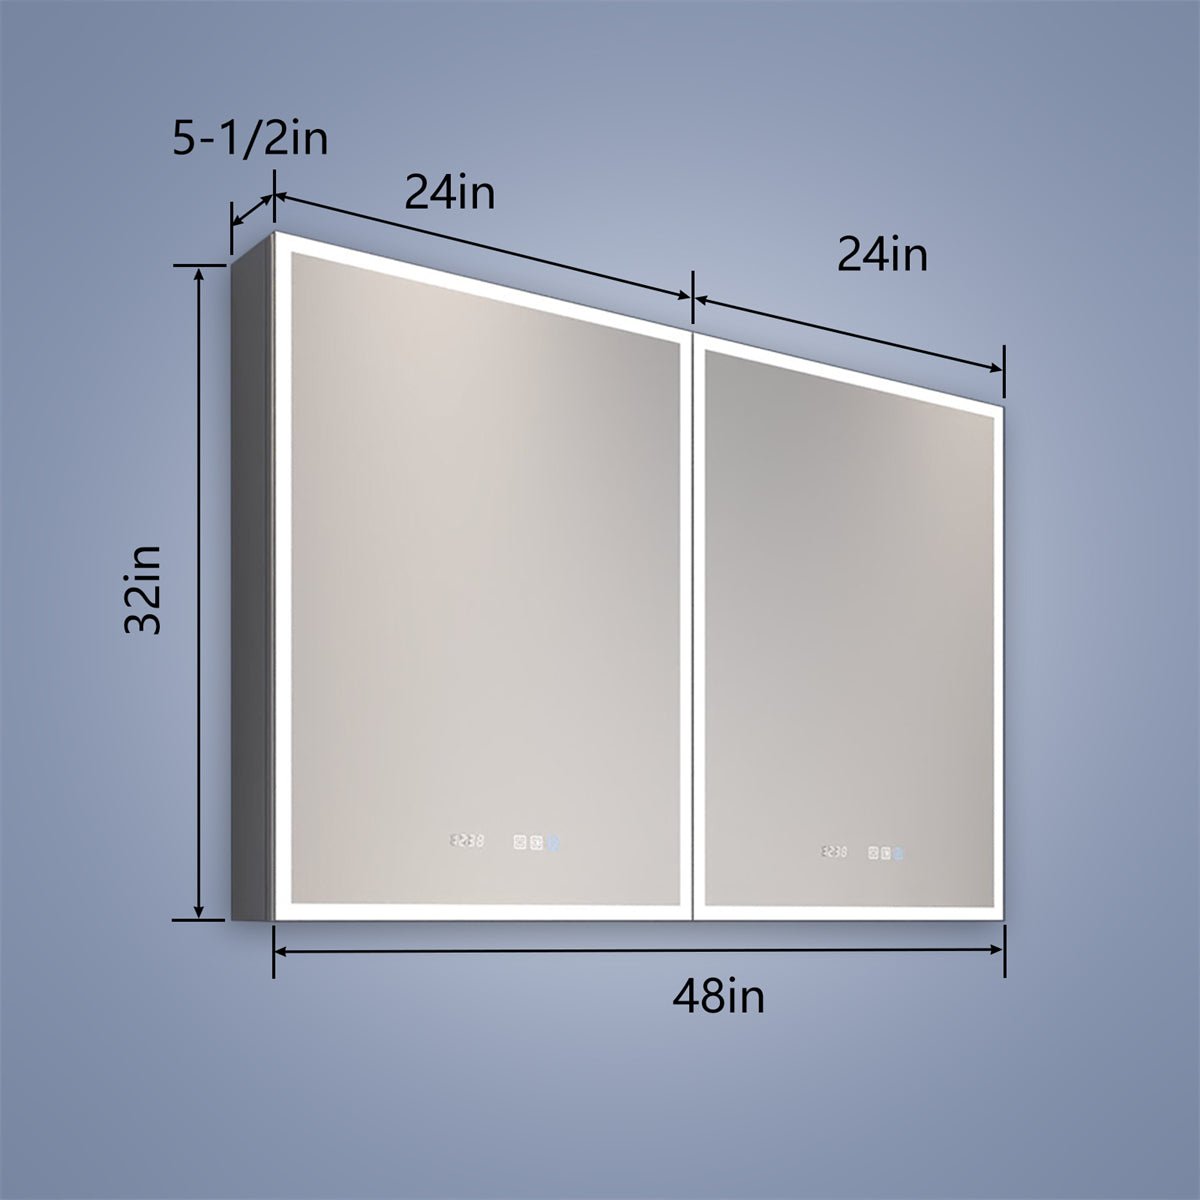 Rim 48" W x 32" H Lighted Medicine Cabinet Recessed or Surface led Medicine Cabinet with Outlets & USBs